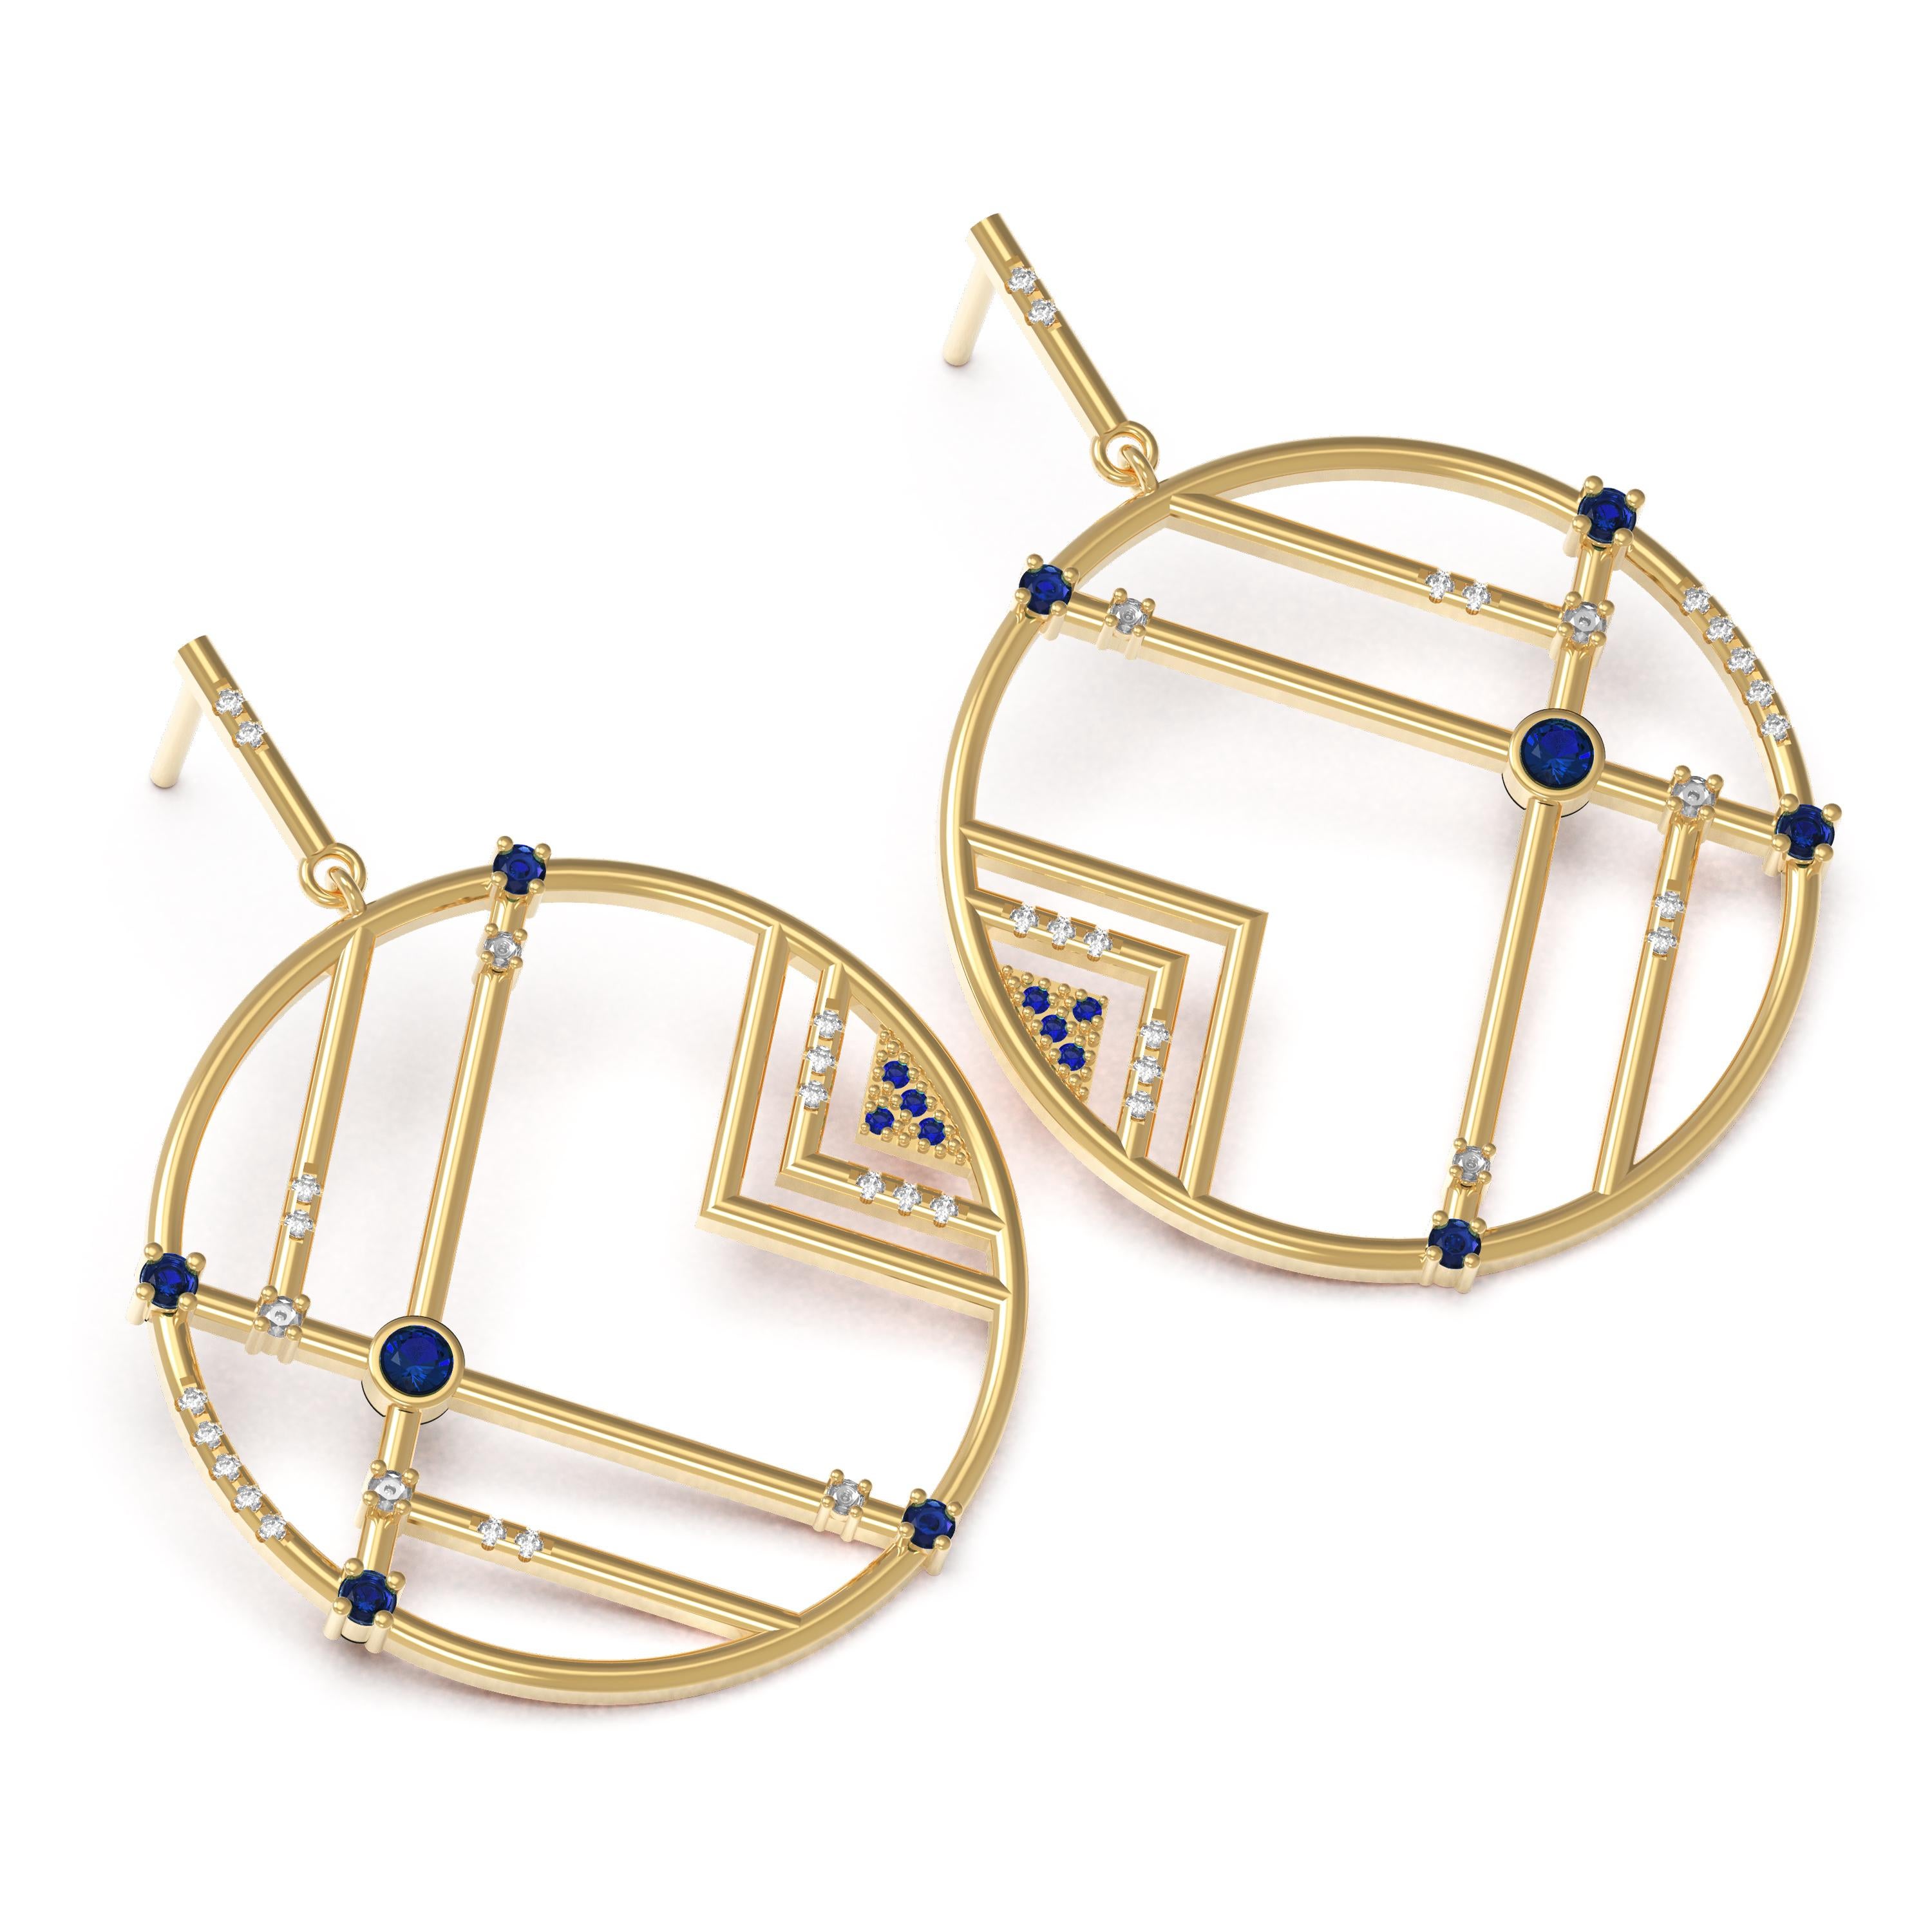 Designer: Alexia Gryllaki
Dimensions: L41x30mm
Weight: approximately 11.7g (pair)
Barcode: ING038E

The Interlocking Geometry earrings in 18 karat yellow gold with sapphires approx. 0.62cts and round brilliant-cut diamonds approx. 0.26cts.

About